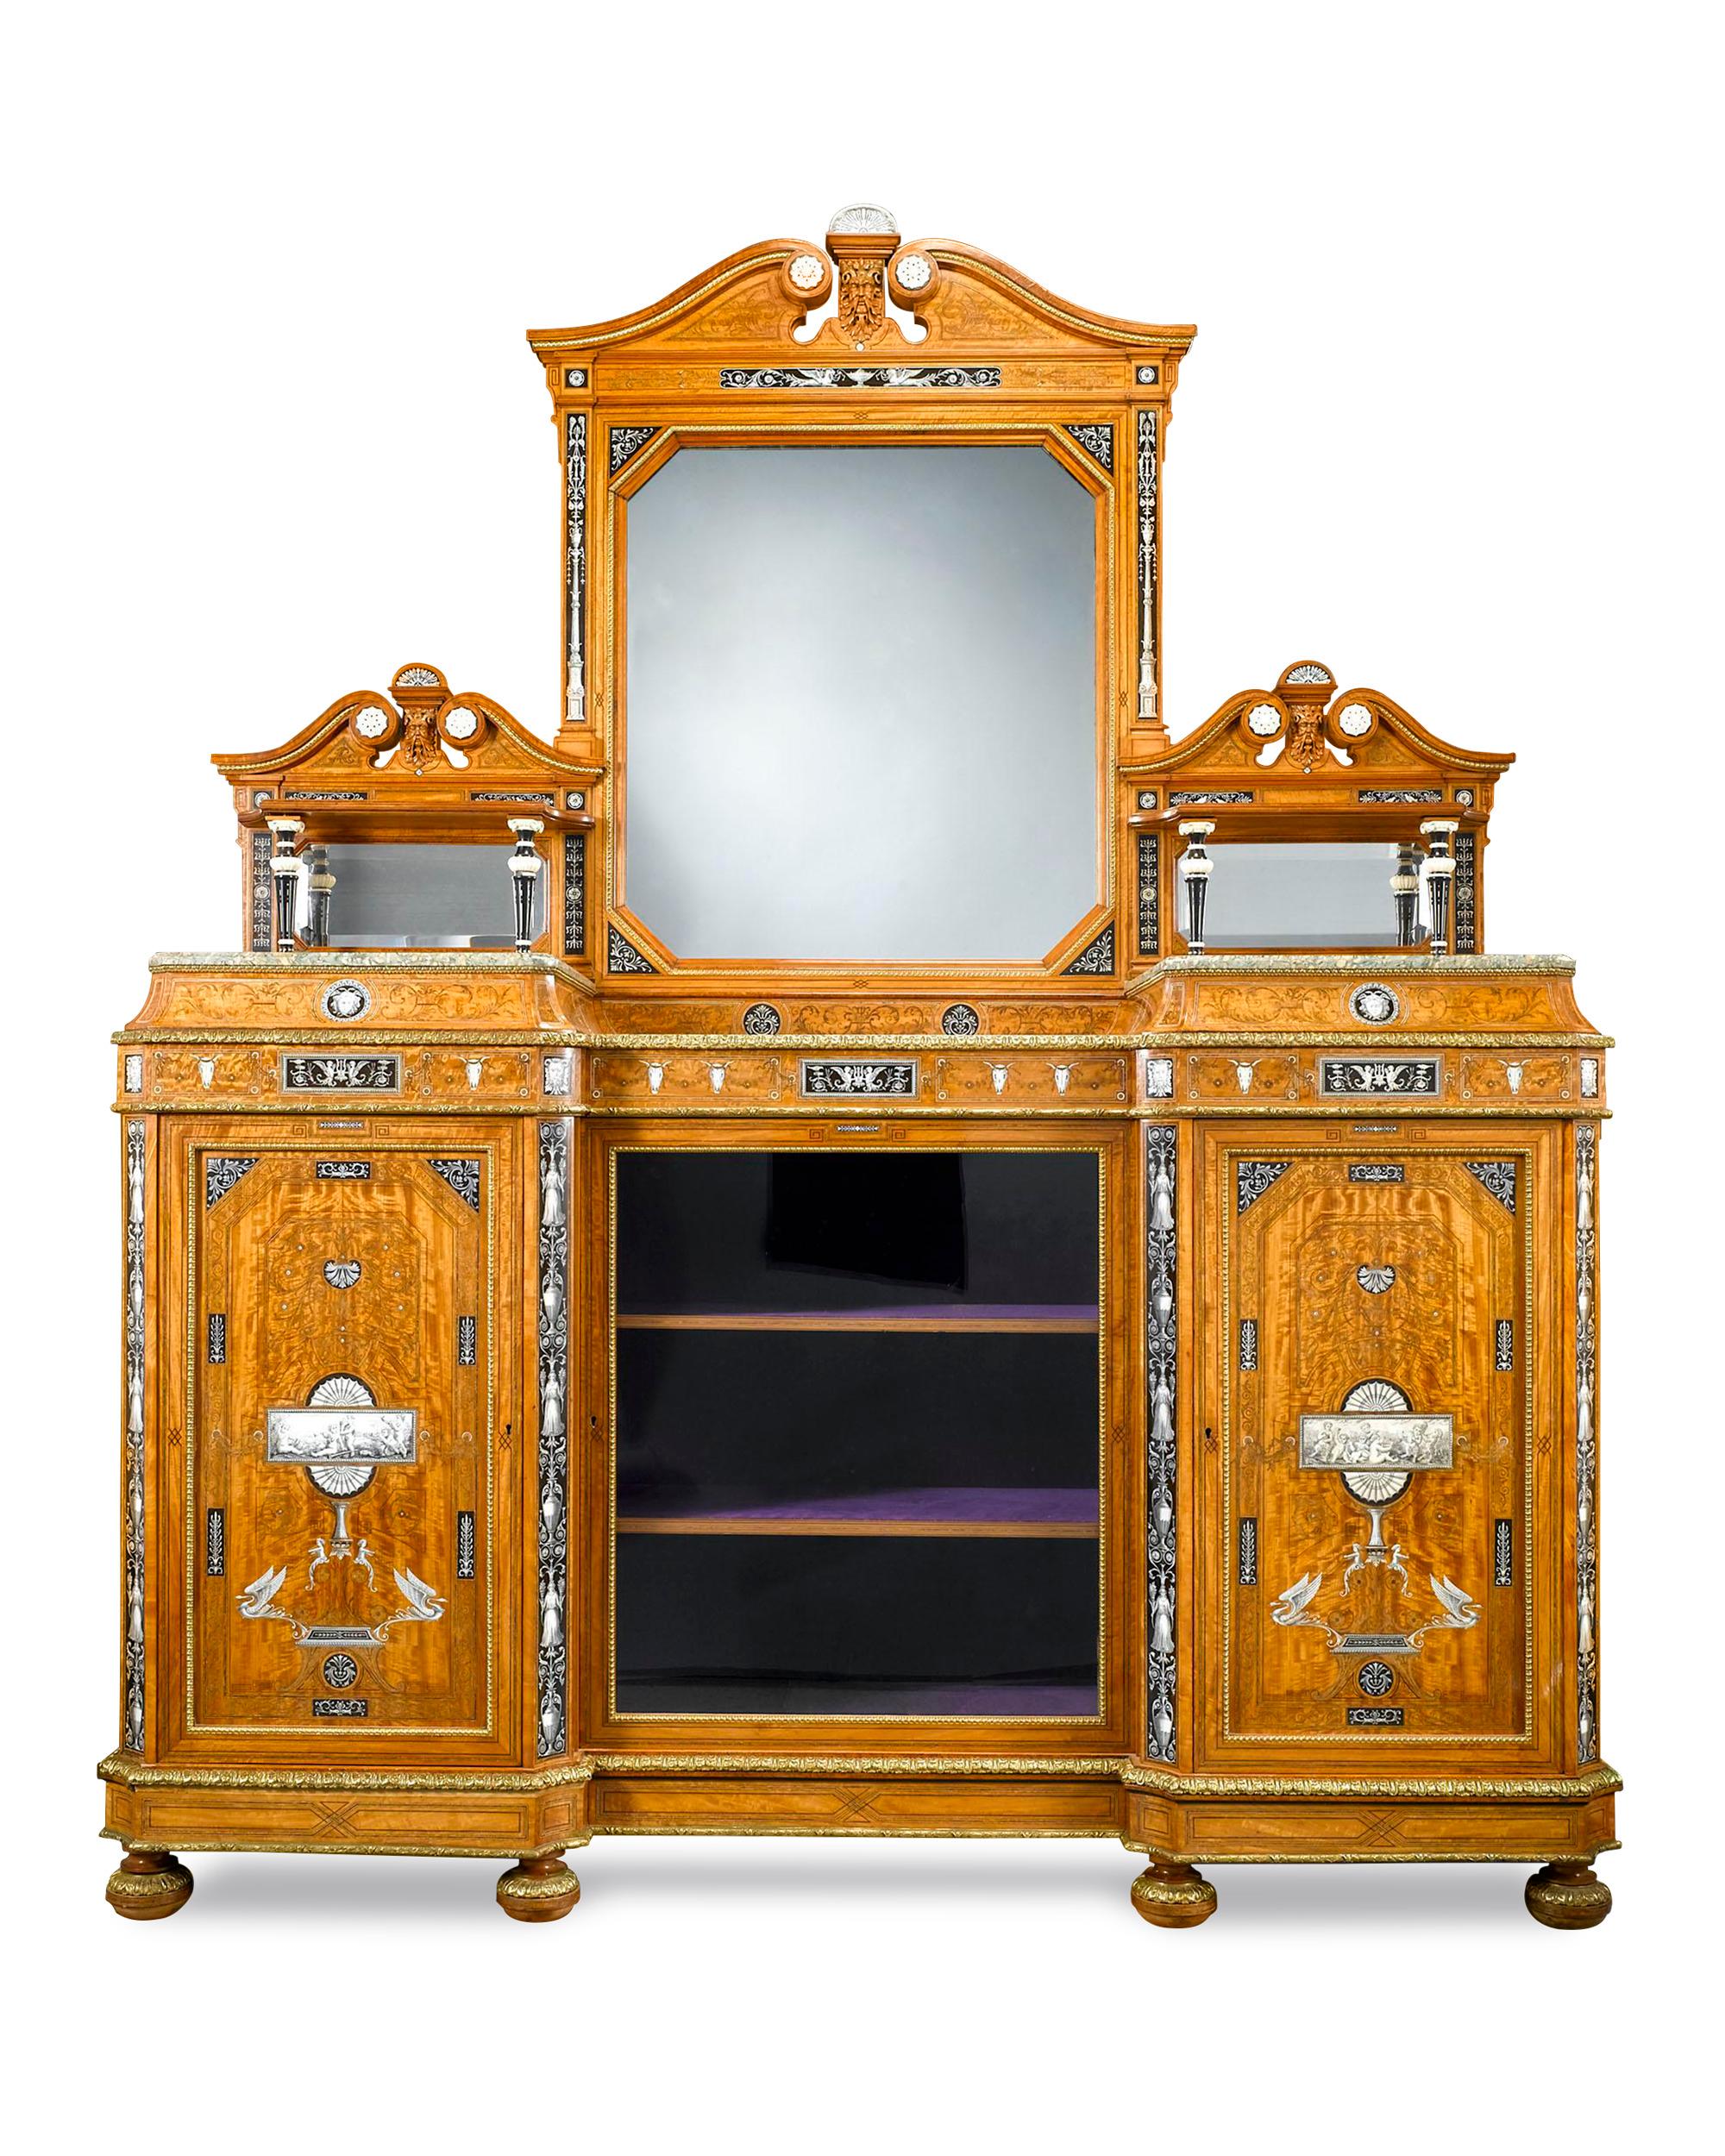 This extraordinary sideboard is attributed to the famed Wright and Mansfield and was only certainly created specifically for the important 19th century international exhibitions. Satinwood, ebony, marble and doré bronze of superior quality, are